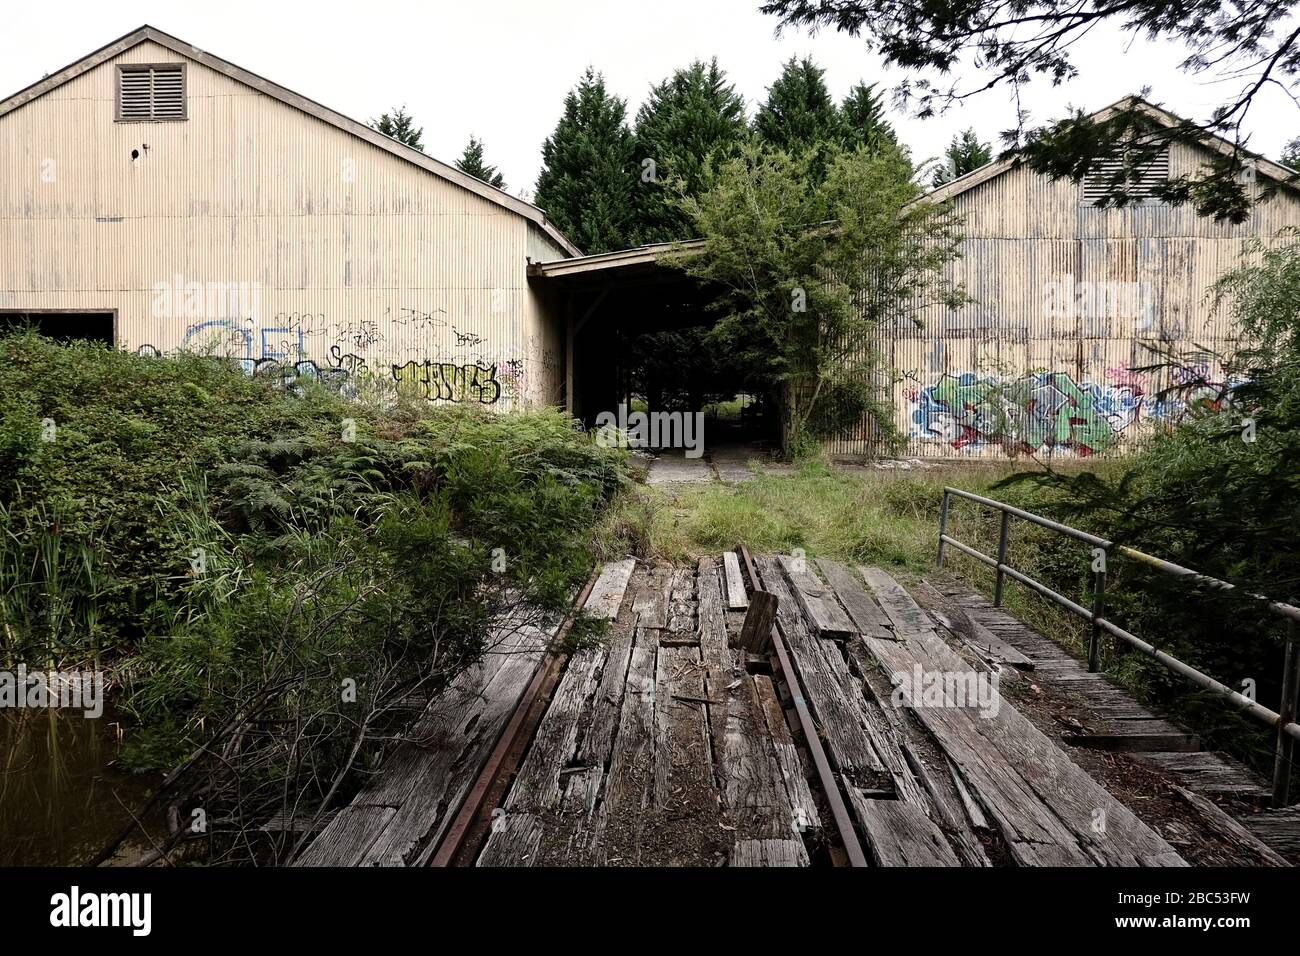 Rotten timber plank bridge over the Nattai River at The Maltings, corrugated iron warehouses on the derelict industrial site Mittagong, NSW Stock Photo